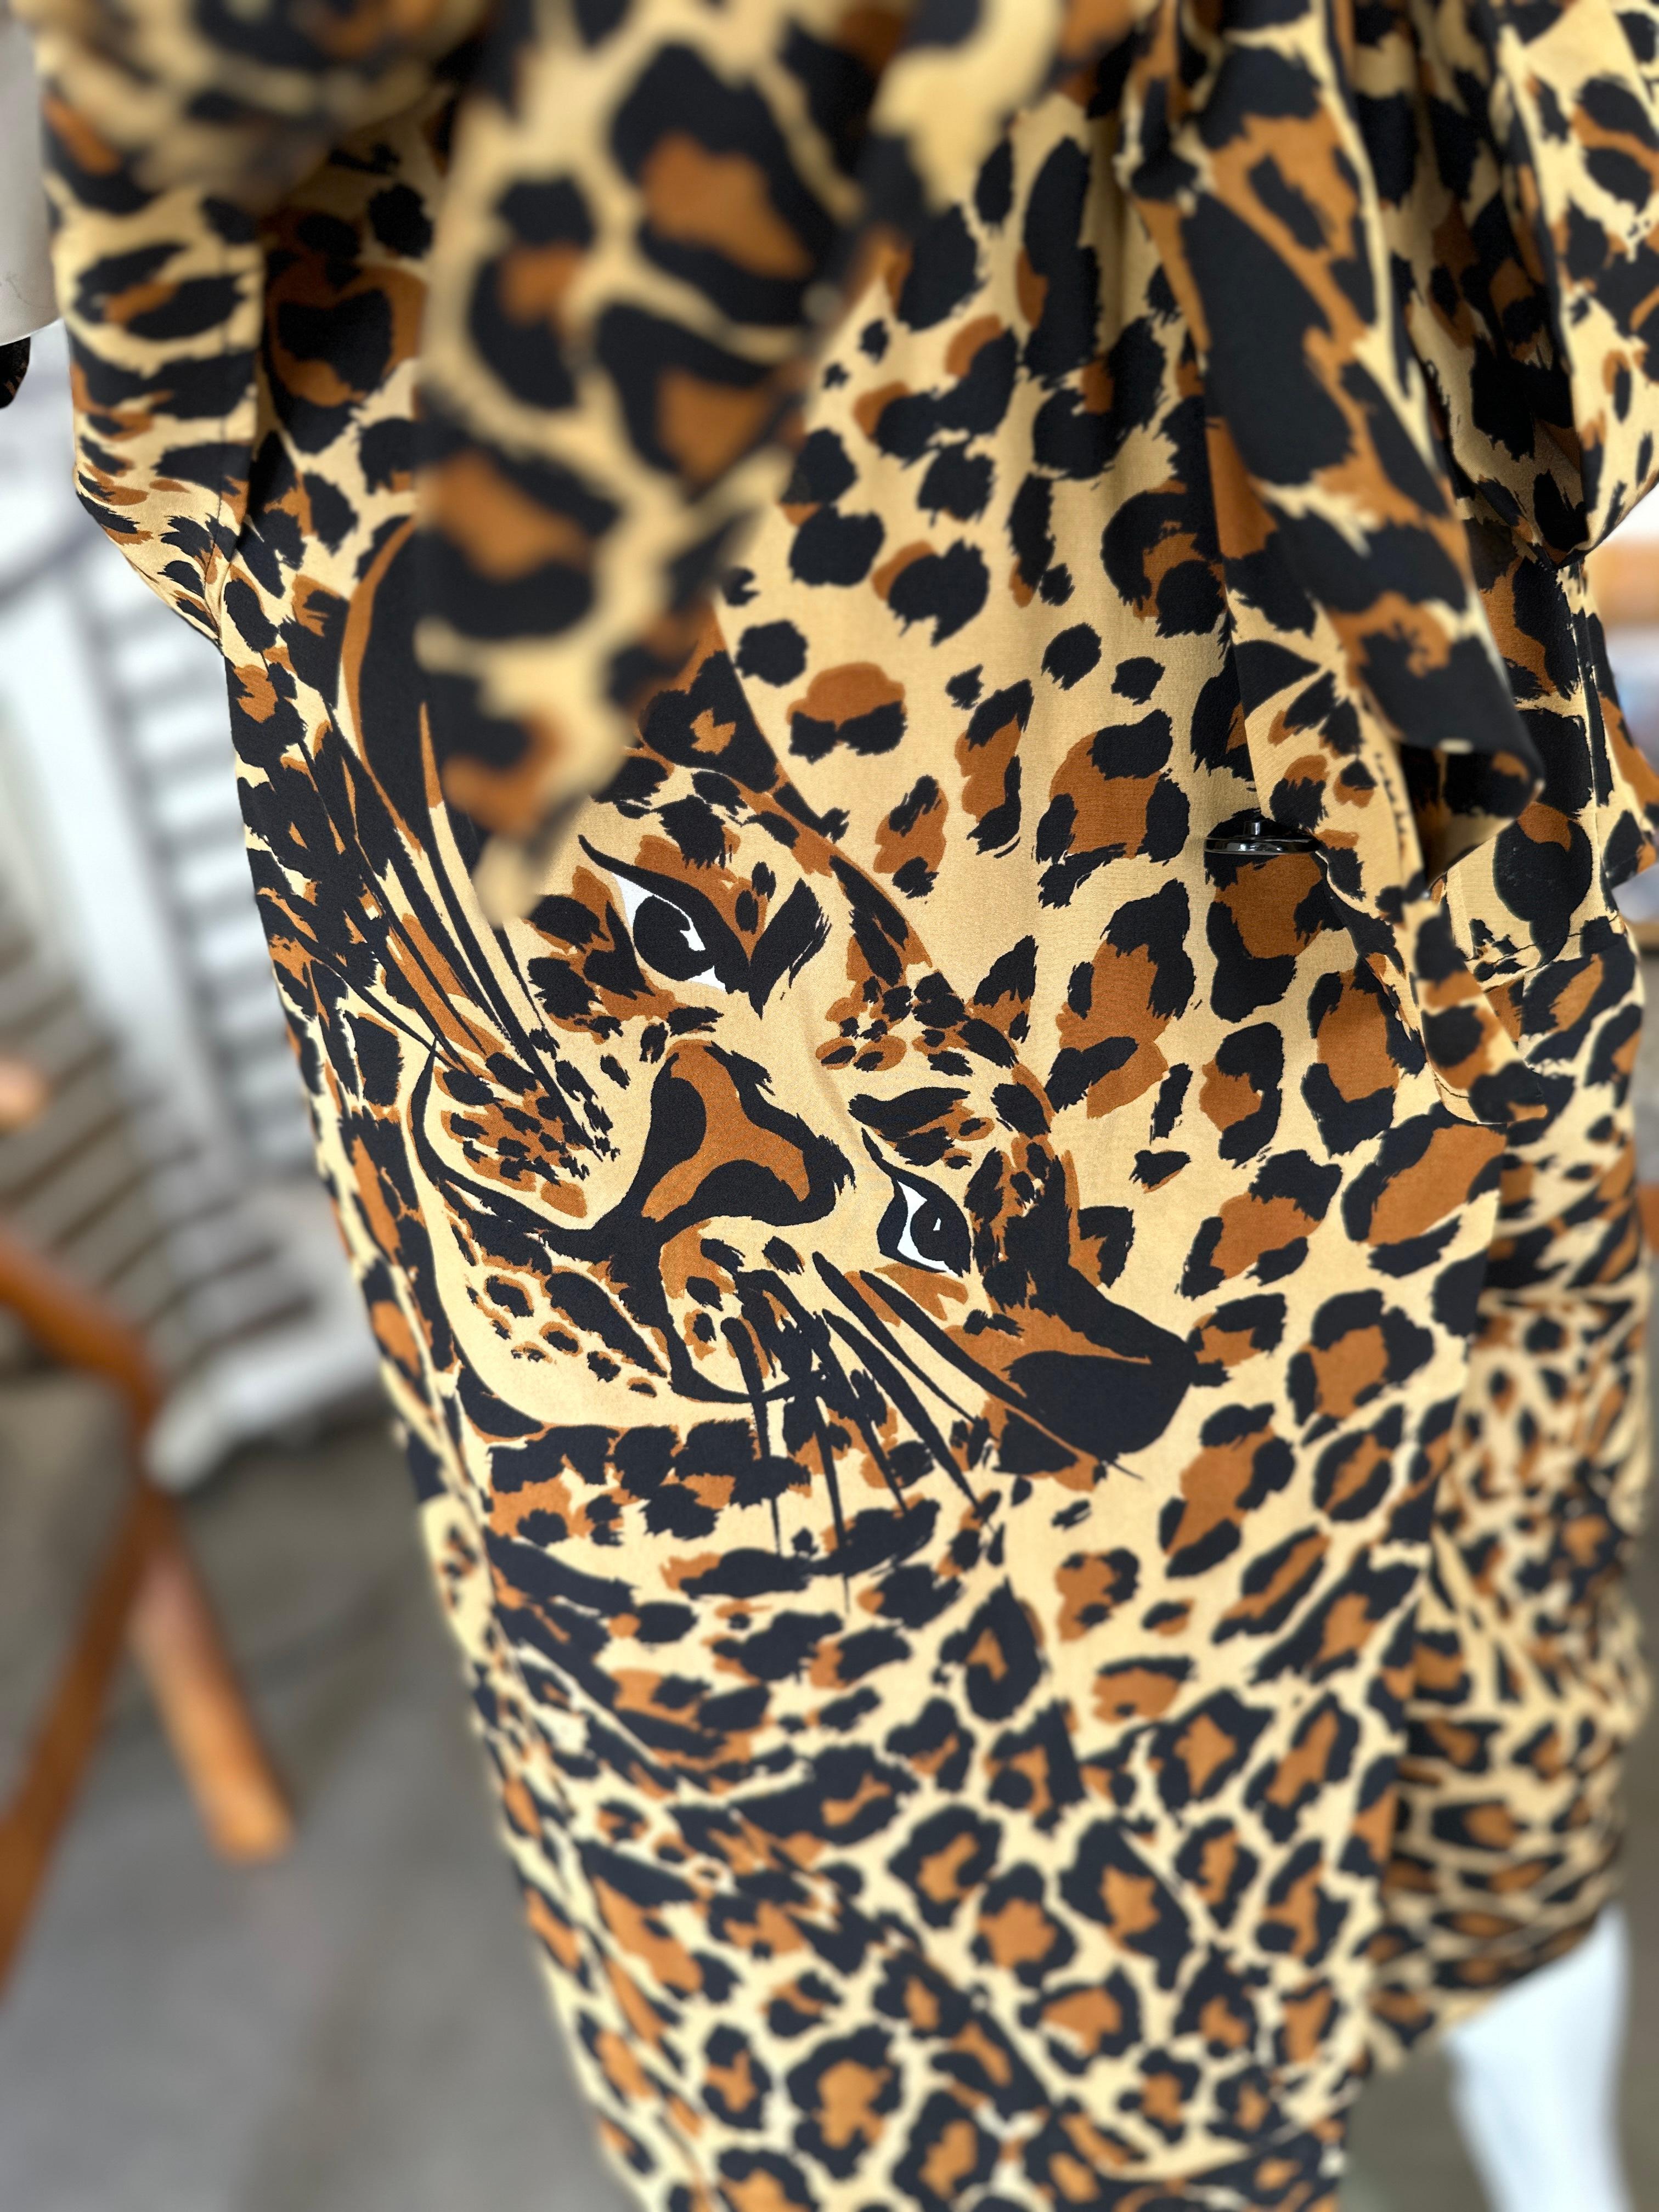 YSL Rive Gauche Fall 1986 Silk Leopard Print 3 Piece Cocktail Dress In Excellent Condition For Sale In Cloverdale, CA